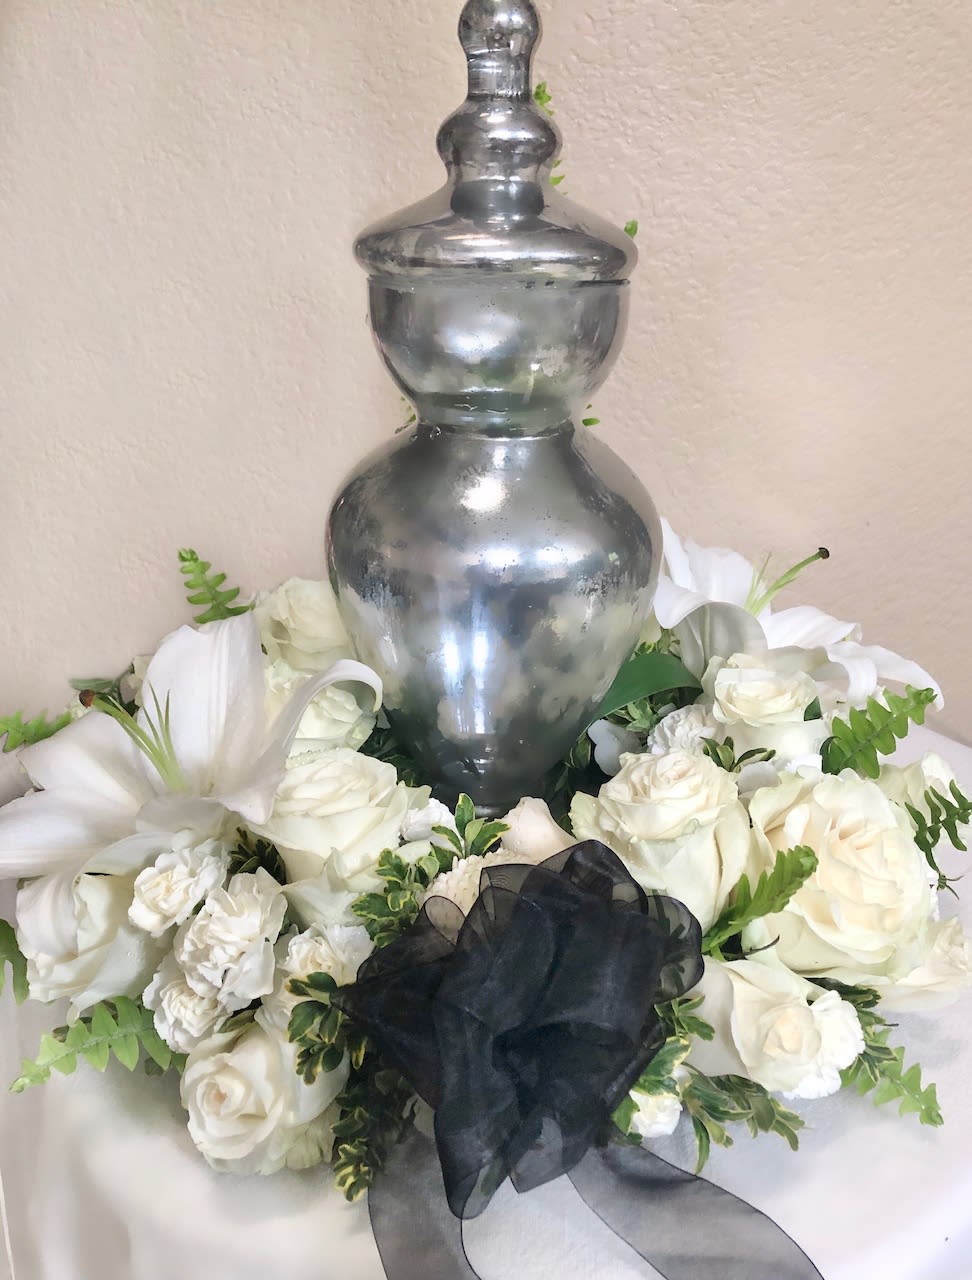 Memorial Urn Wreath - A traditional floral wreath to display an urn for a funeral service or home memorial.  (Urn not included)